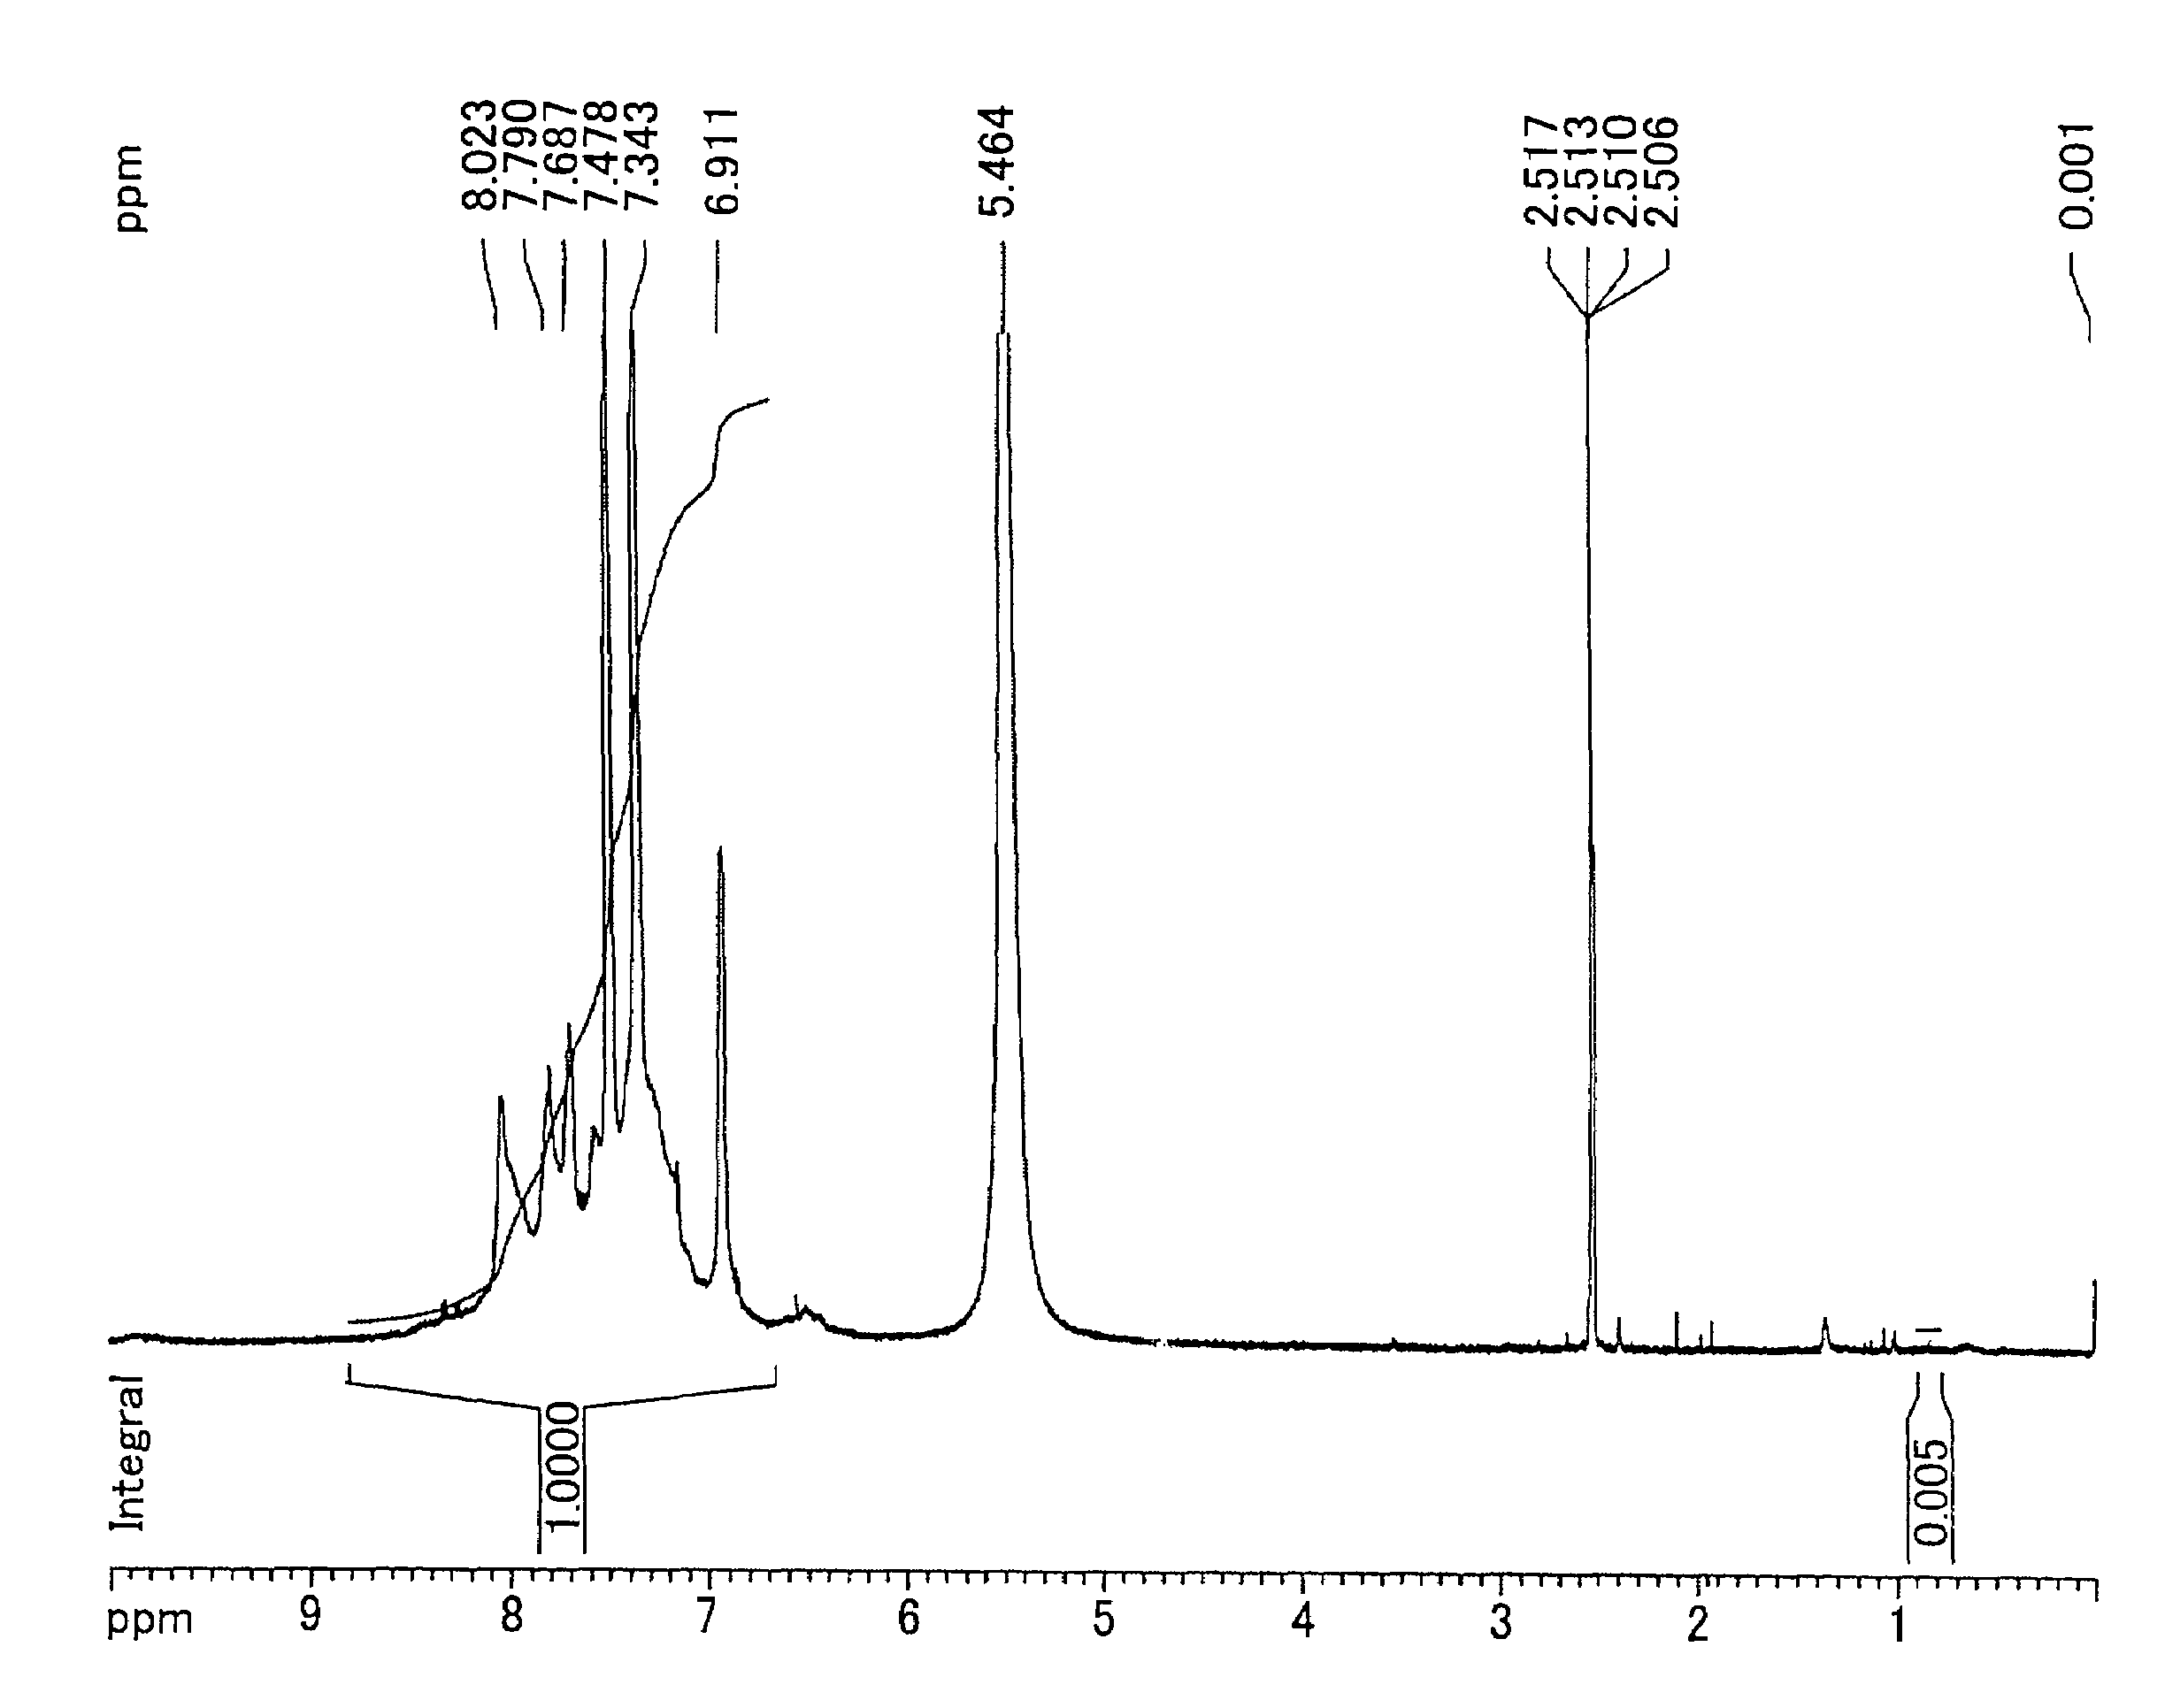 Membrane-electrode assembly for solid polymer electrolyte fuel cell